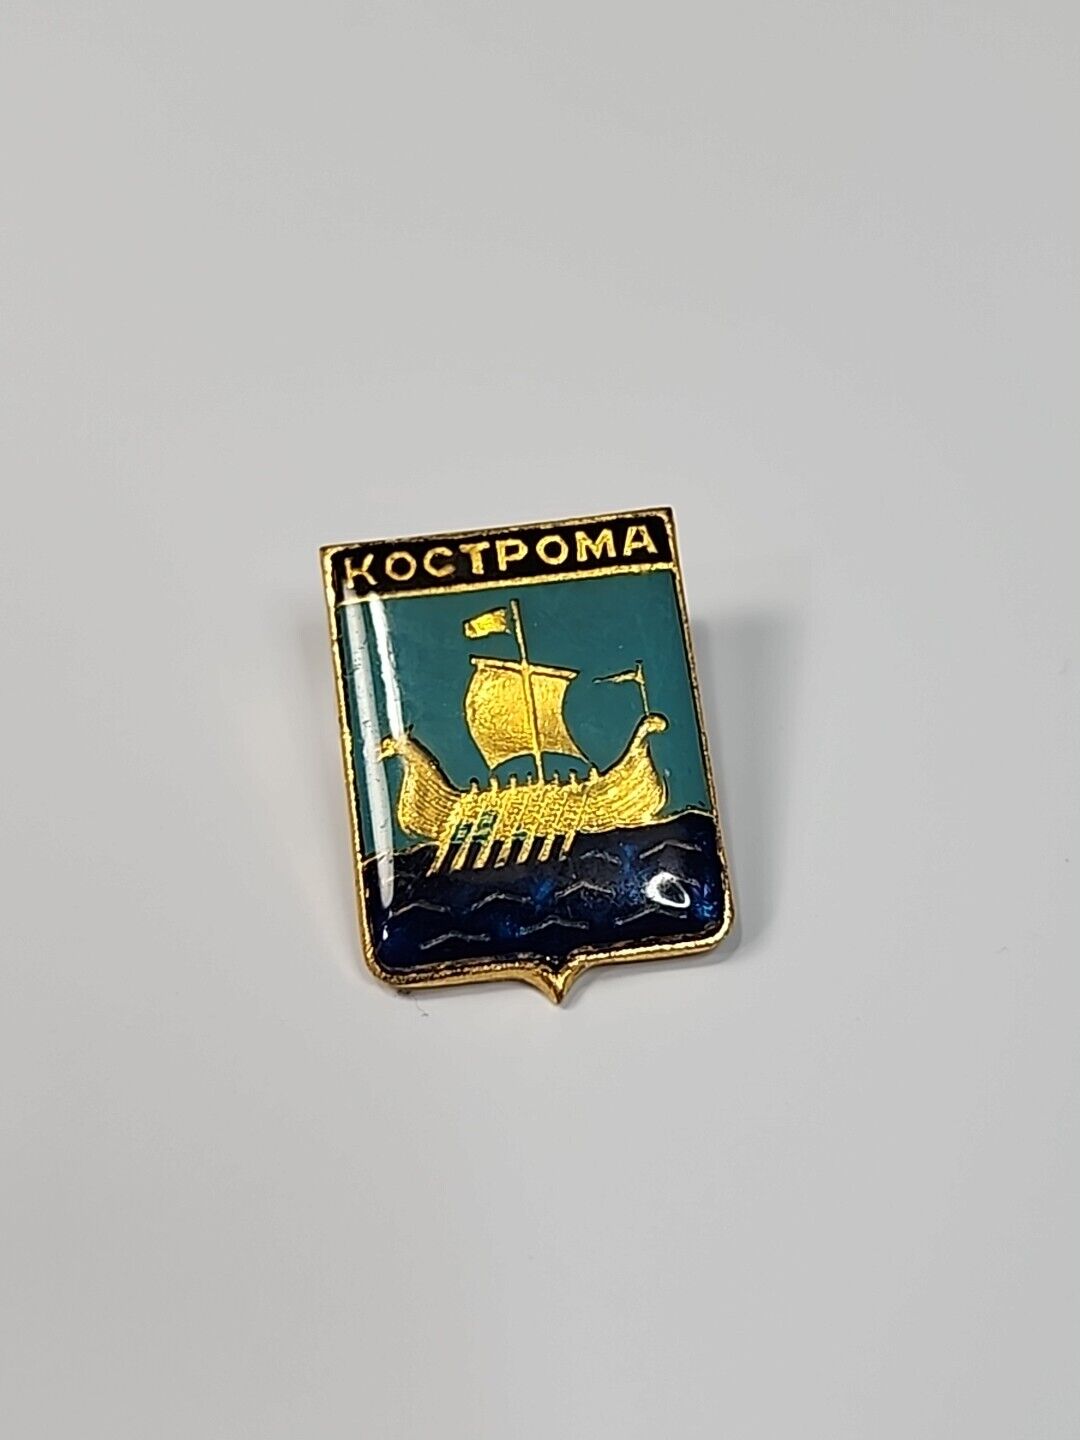 Kostroma Russia Coat of Arms Travel Souvenir Lapel Pin USSR Marked 20K